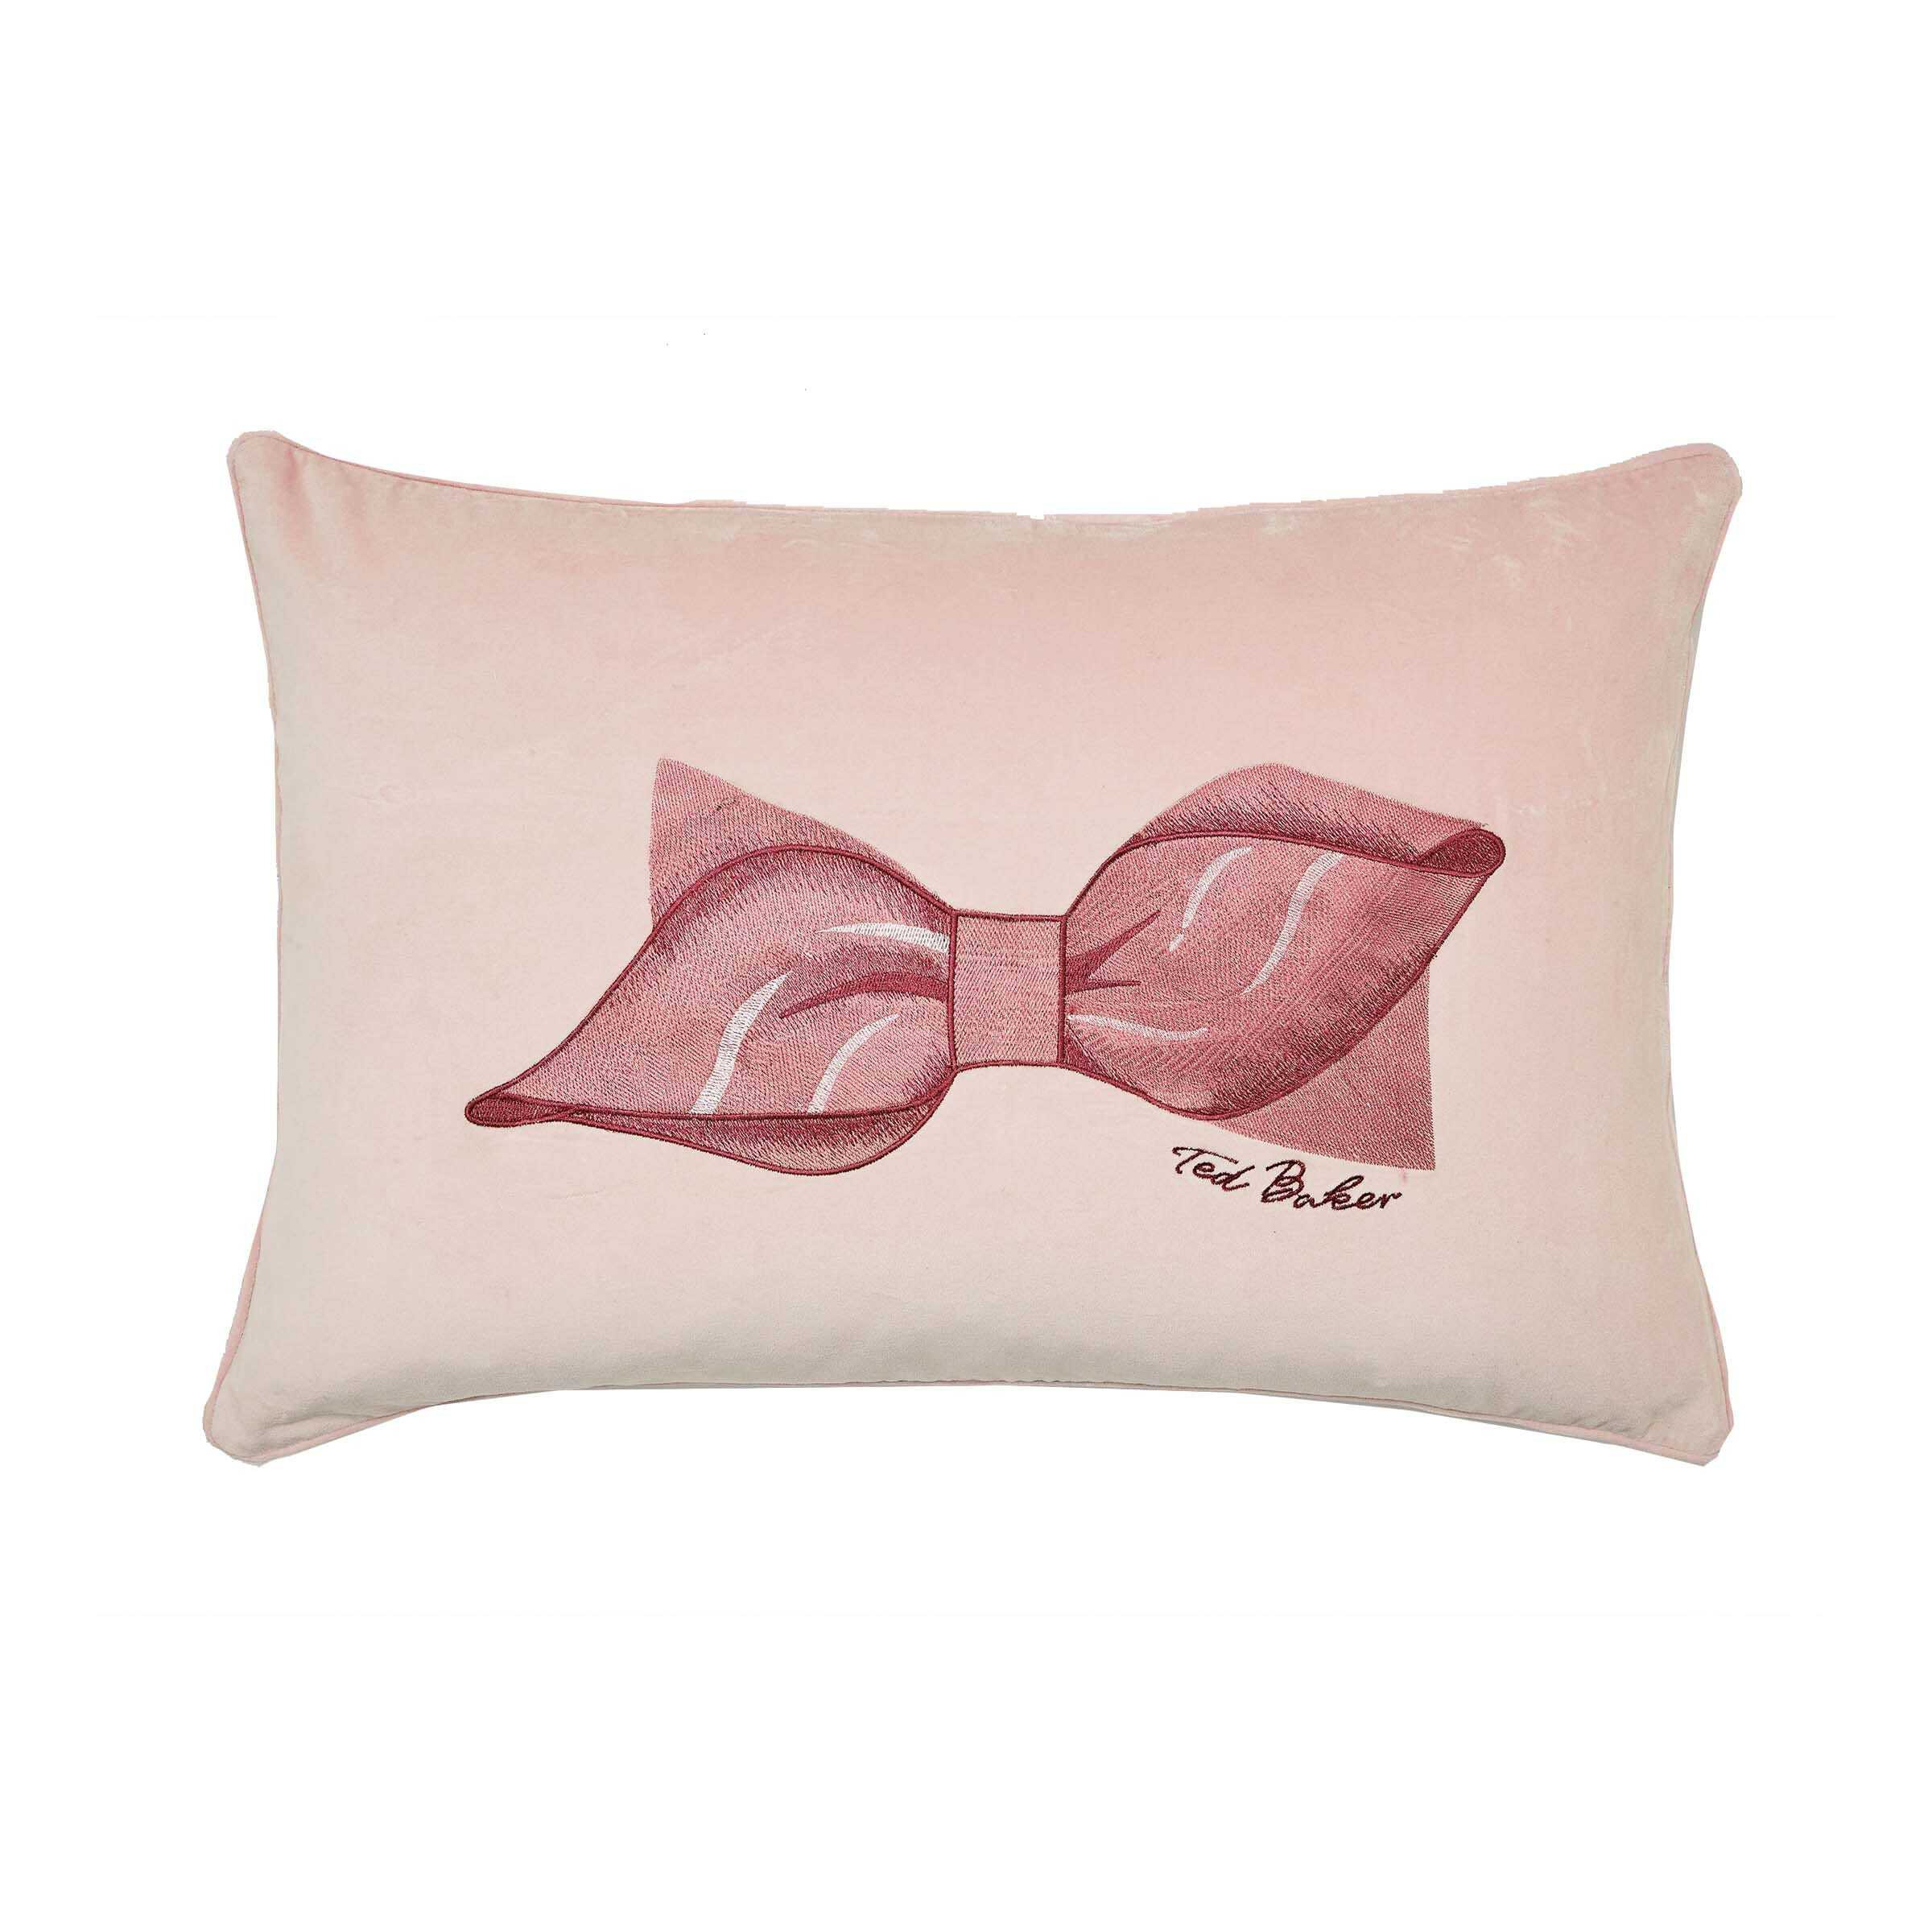 Ted Baker Bow Embroidered Cushion 60cm x 40cm, Pink - image 1